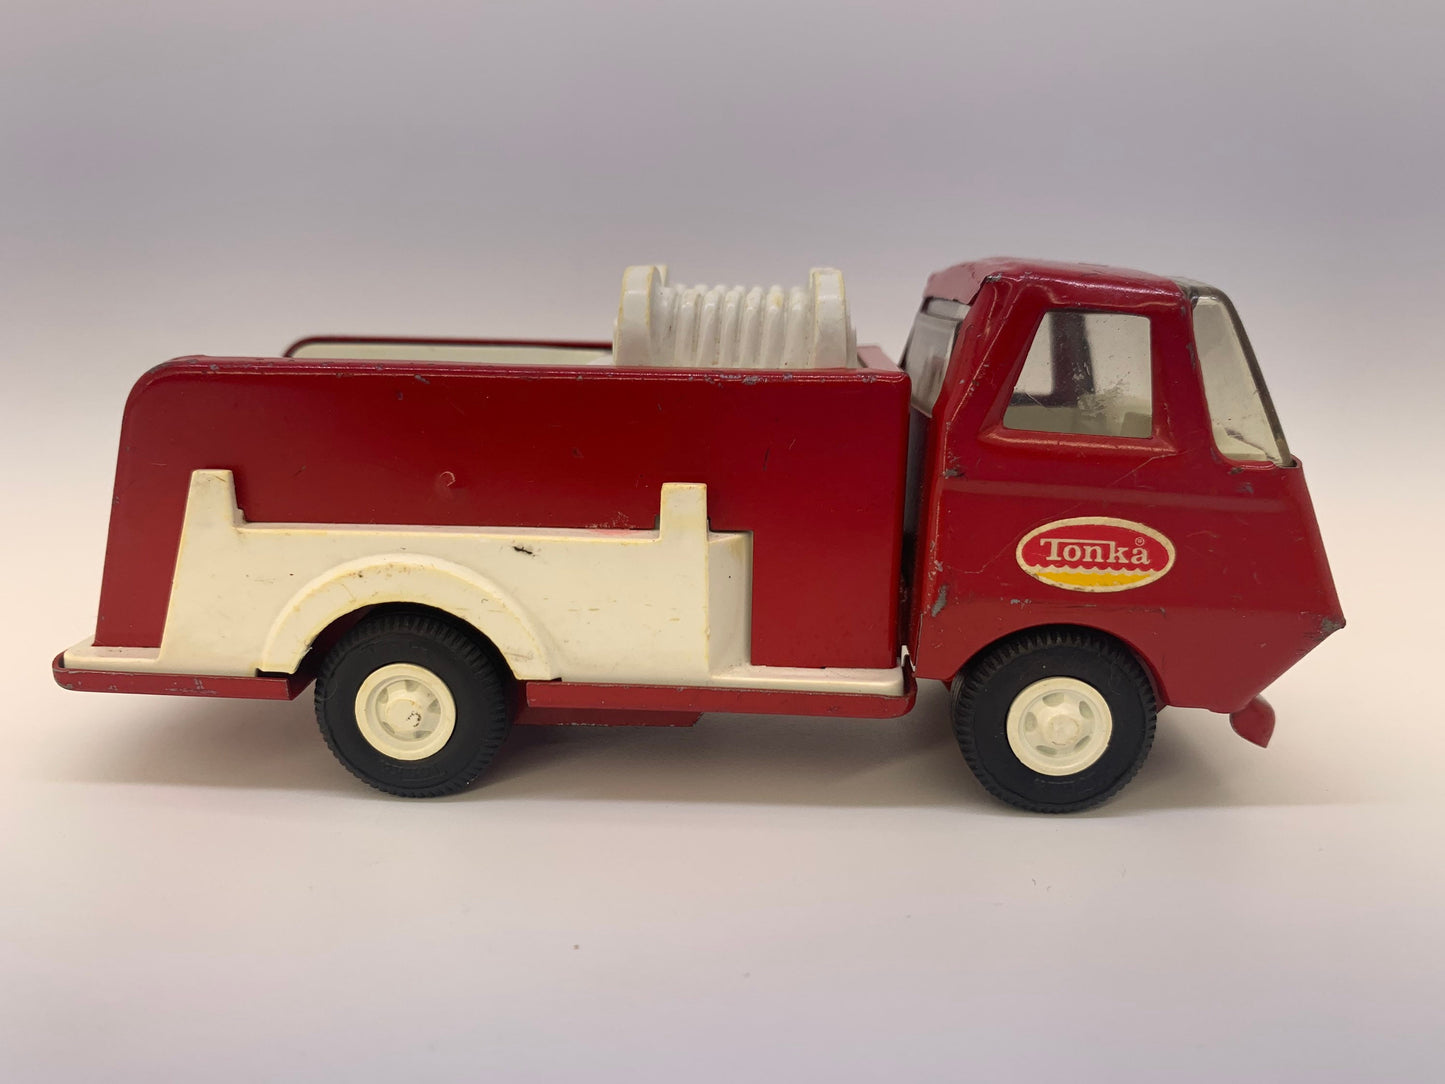 Tonka Pumper Truck Red Collectable Miniature Scale Model Toy Car Perfect Birthday Gift